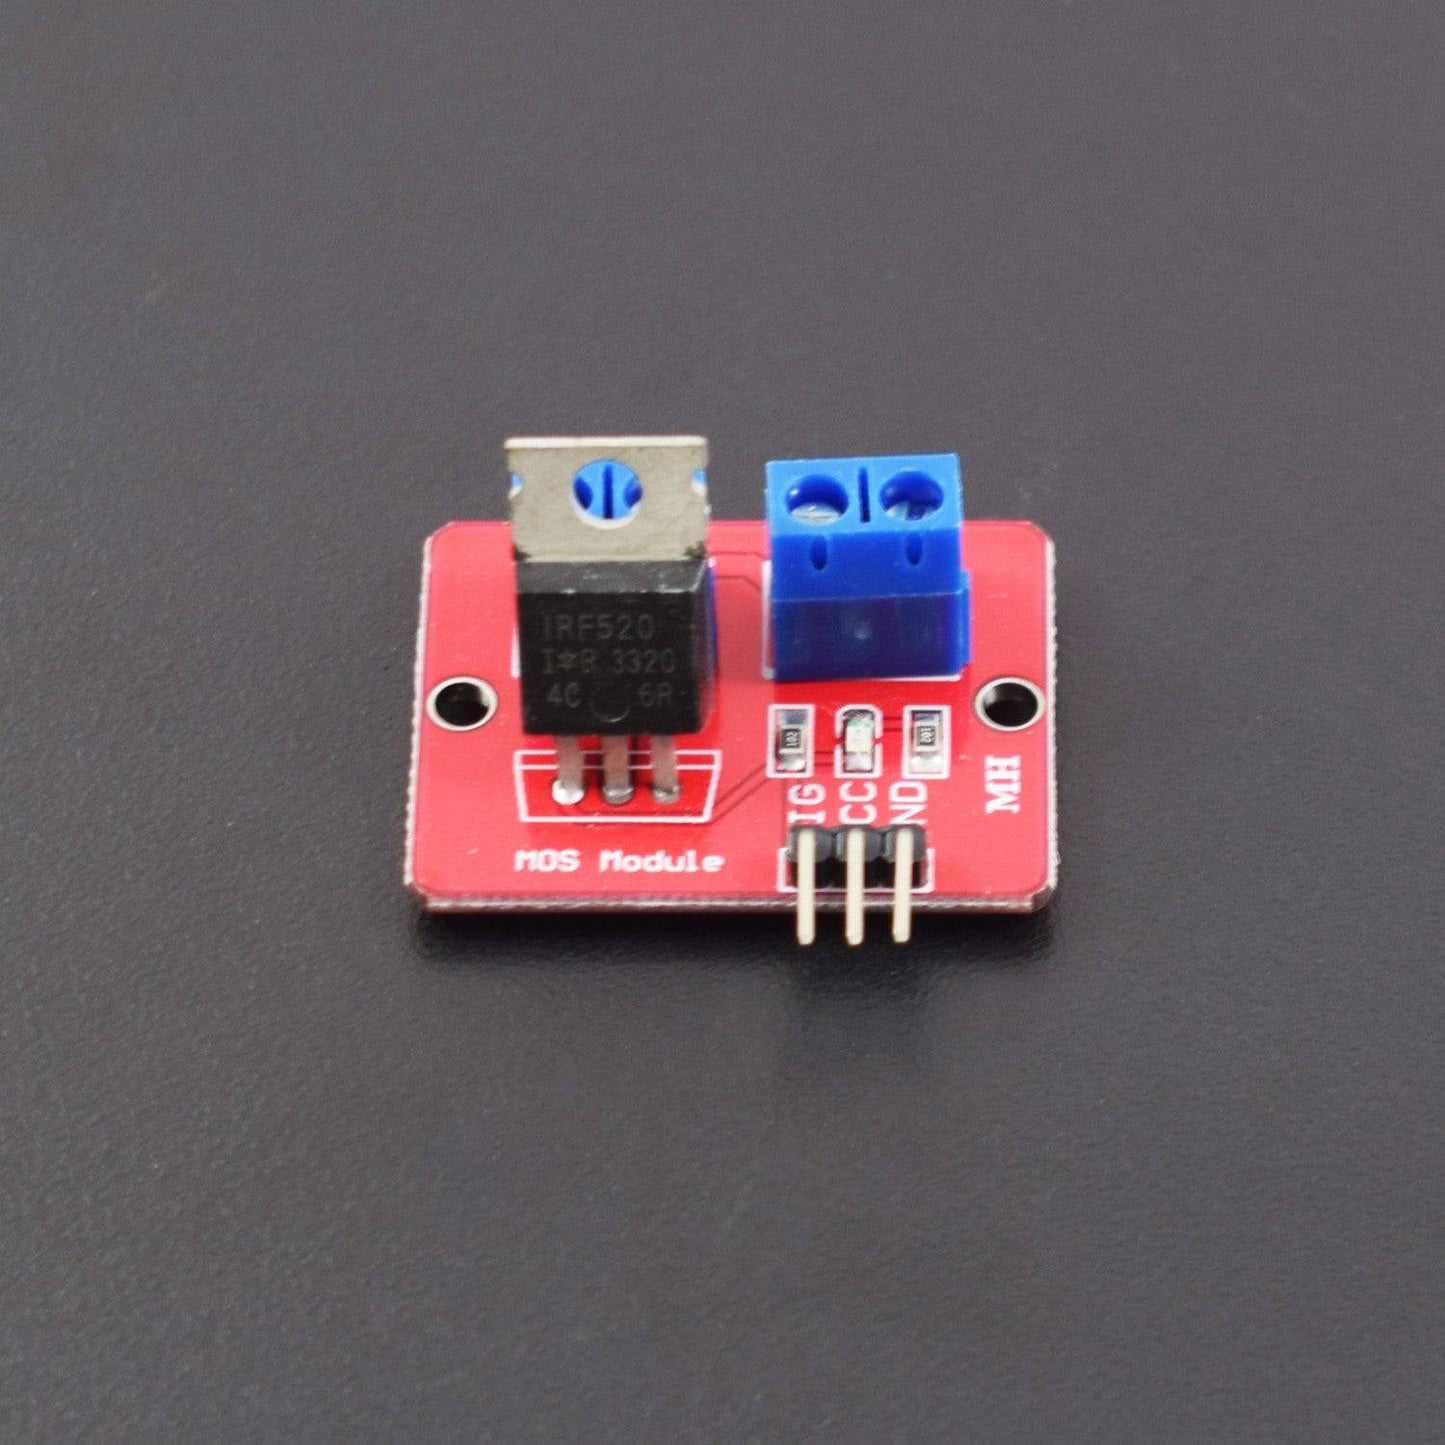 0-24V Top Mosfet Button IRF520 MOS Driver Module For Arduino MCU ARM Raspberry Pi - NA078 - REES52